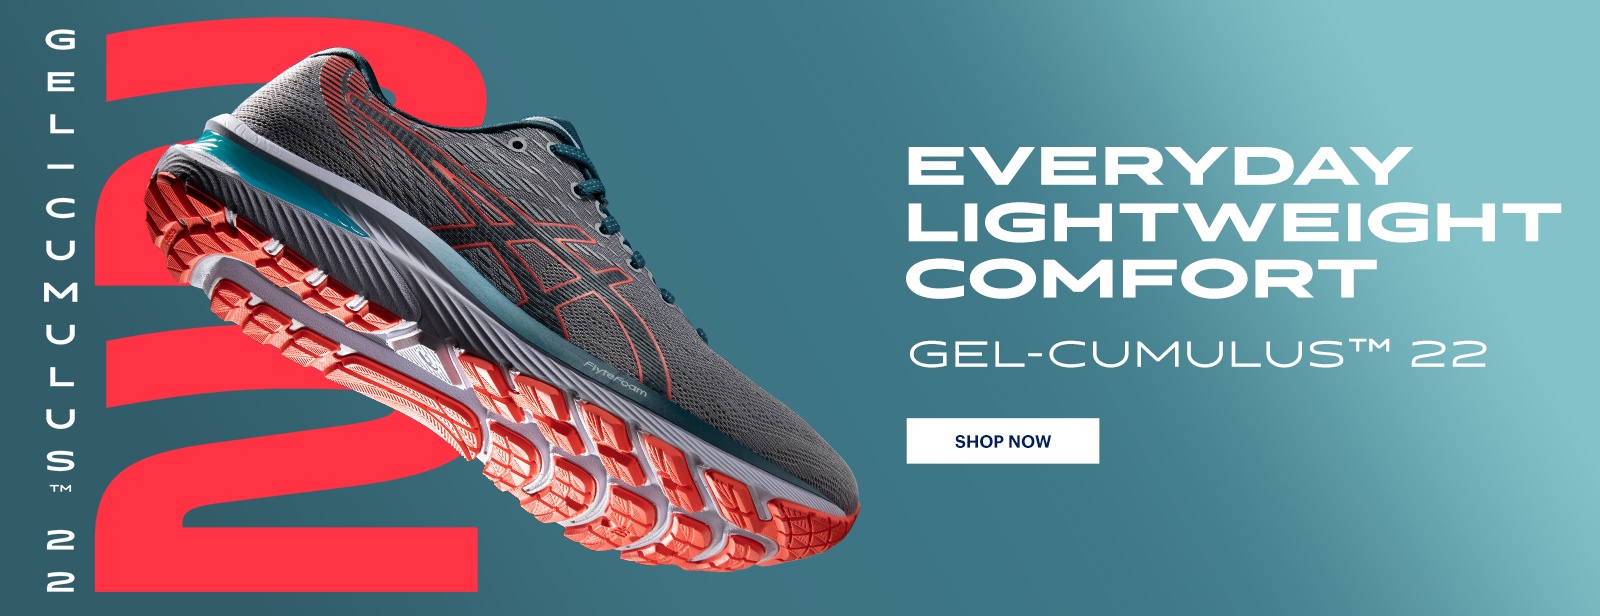 asics official website india